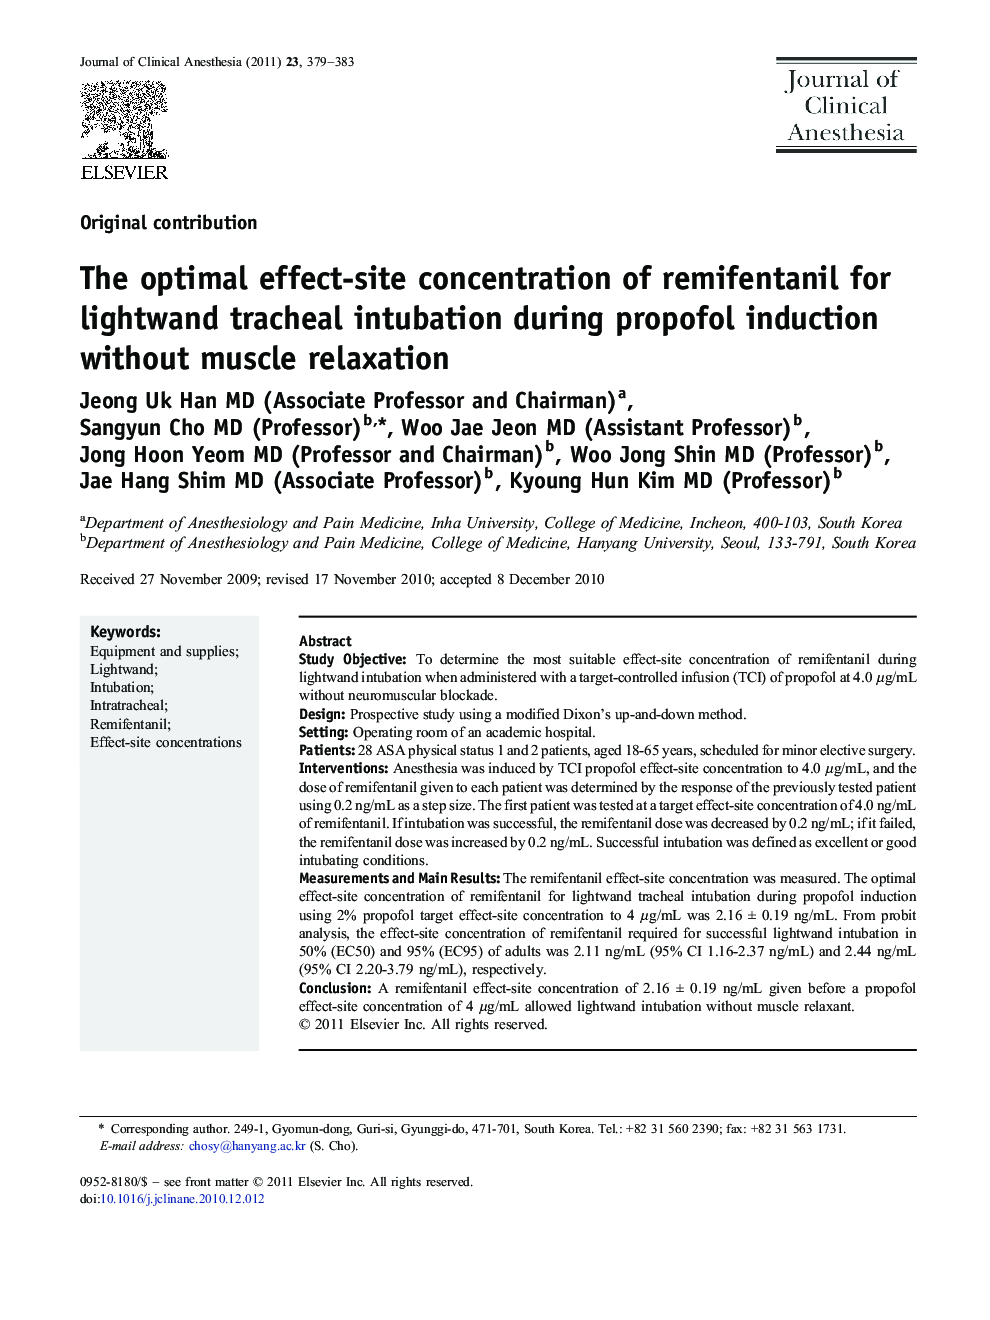 The optimal effect-site concentration of remifentanil for lightwand tracheal intubation during propofol induction without muscle relaxation